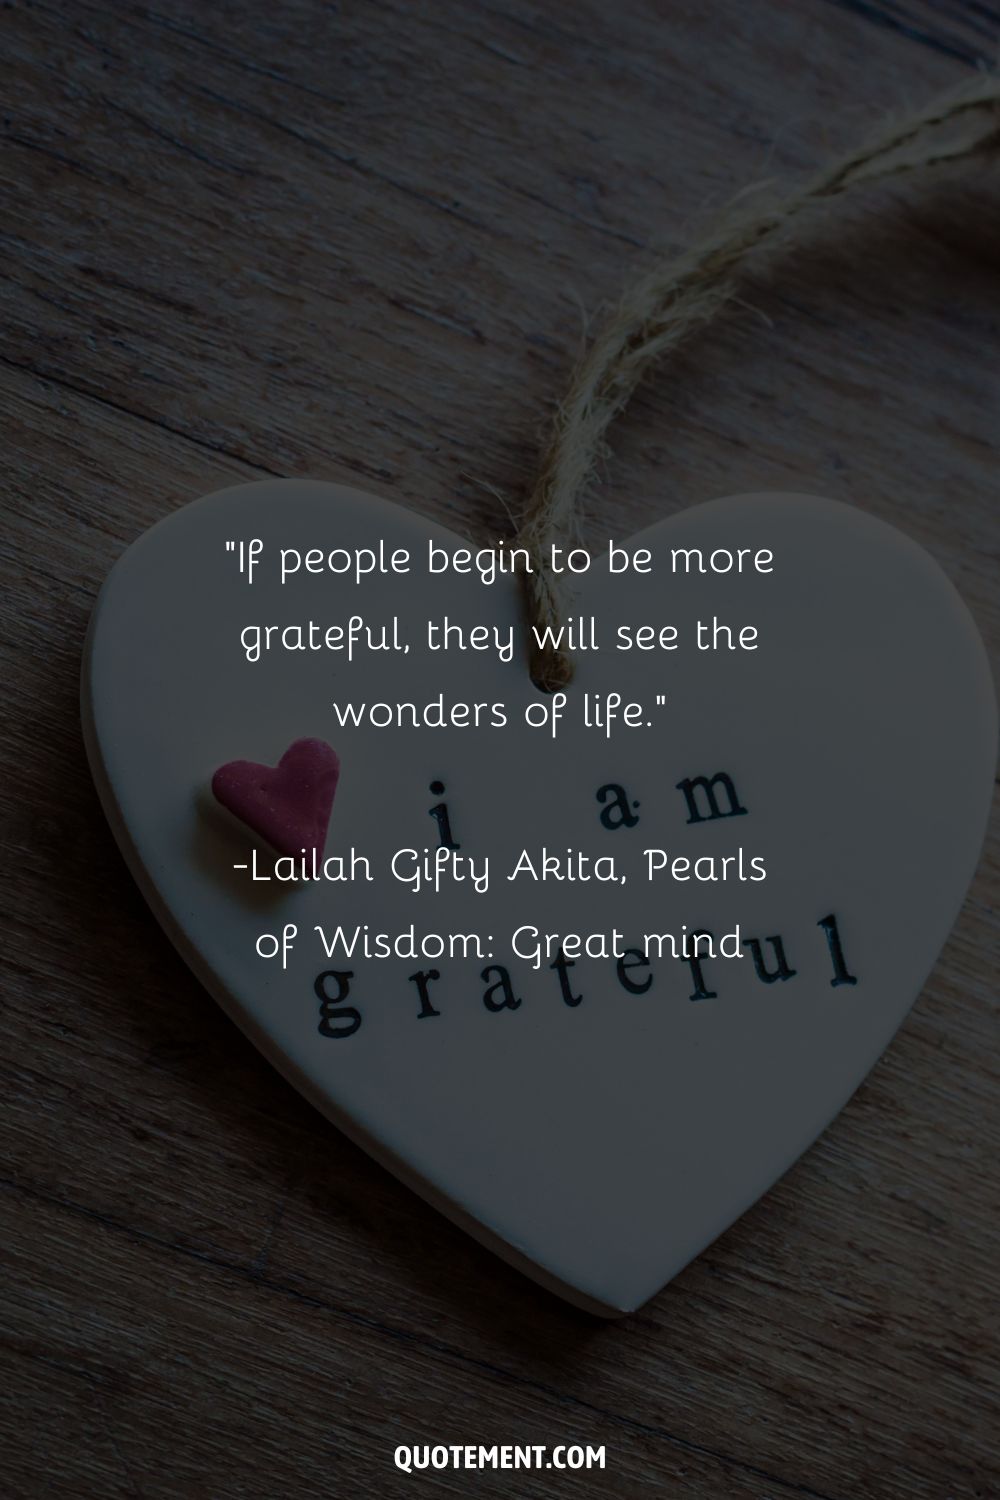 If people begin to be more grateful, they will see the wonders of life.